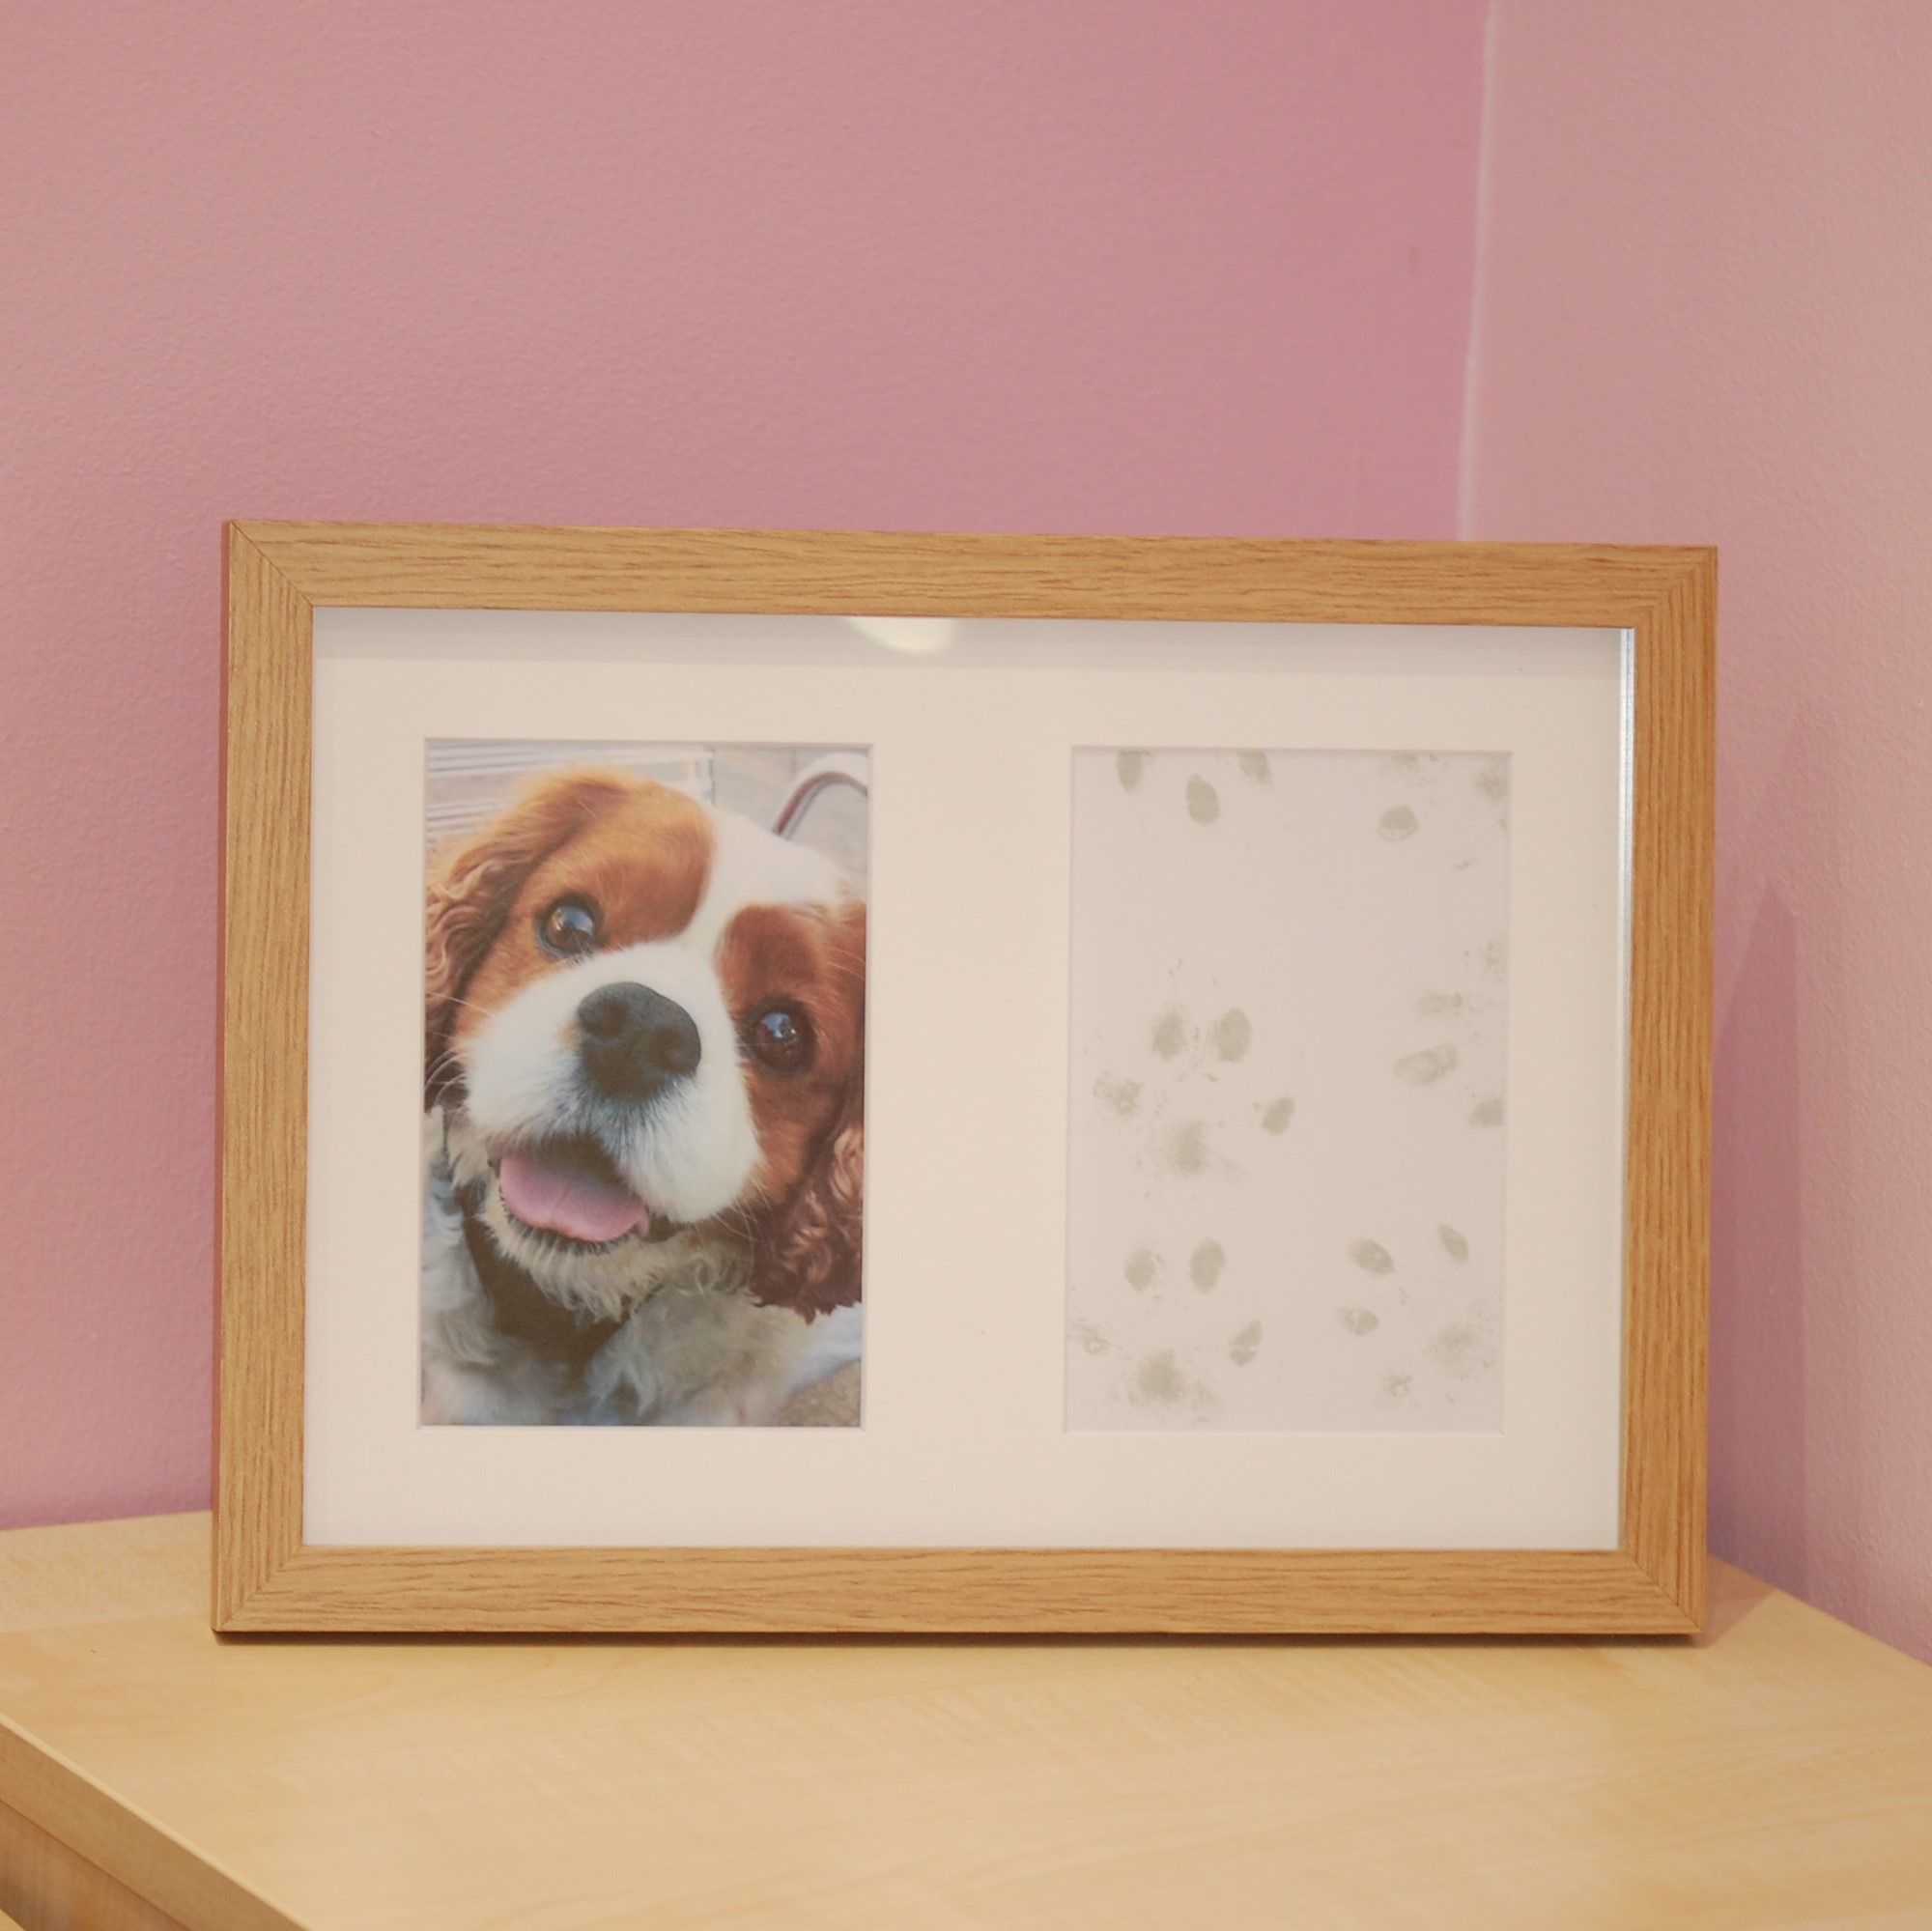 French oak effect frame part of paw print kit with dog paw print and photo keepsake